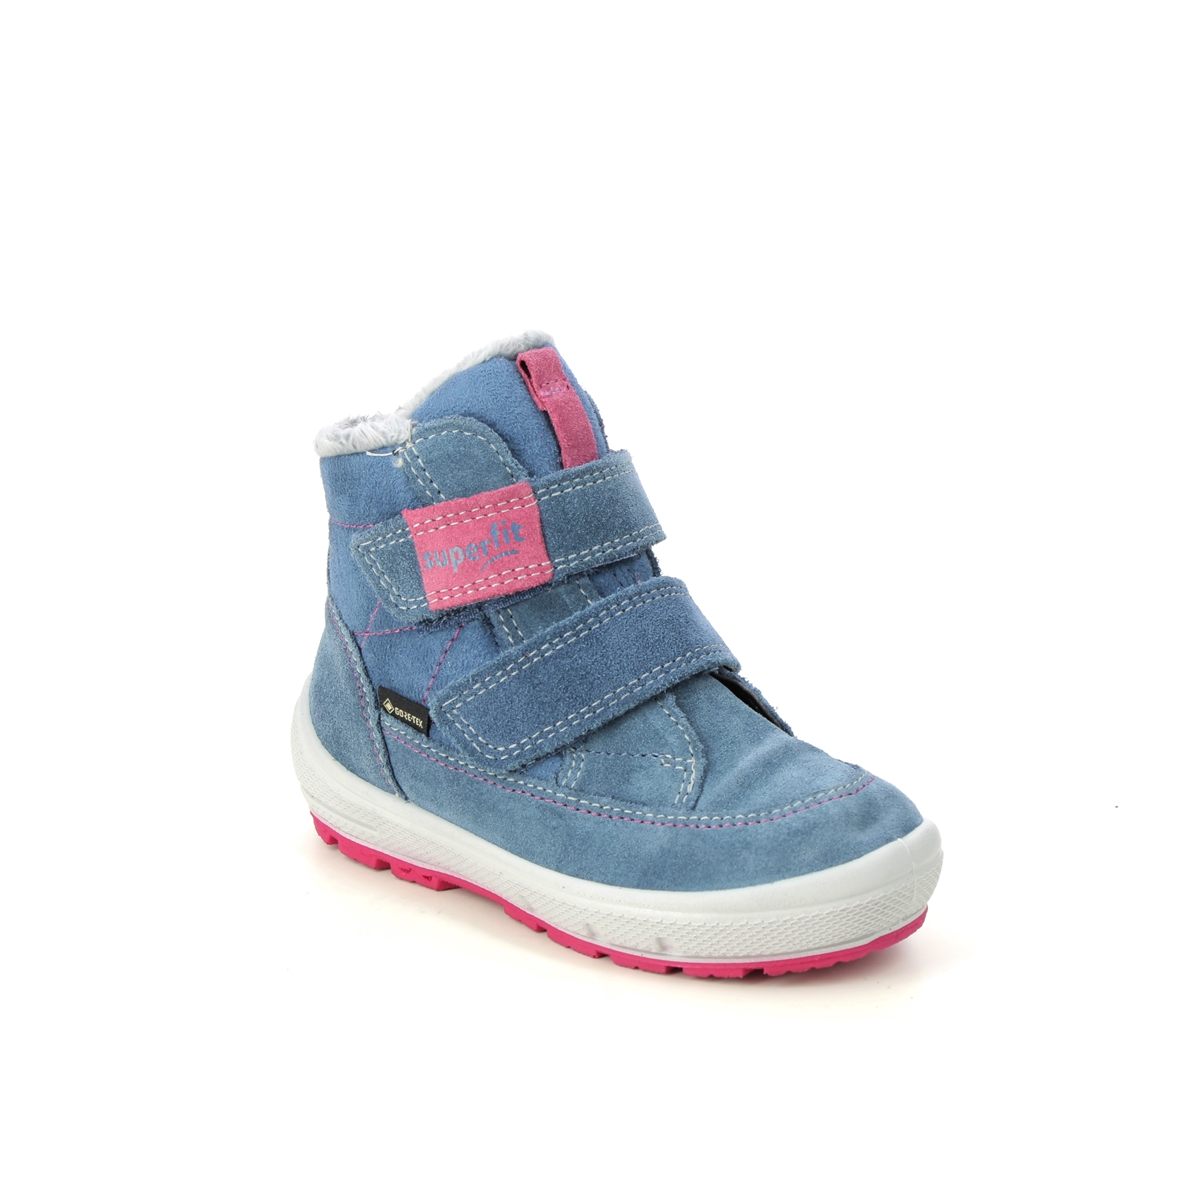 Superfit Groovy Gtx Blue Suede Kids Toddler Girls Boots 1009314-8020 In Size 29 In Plain Blue Suede